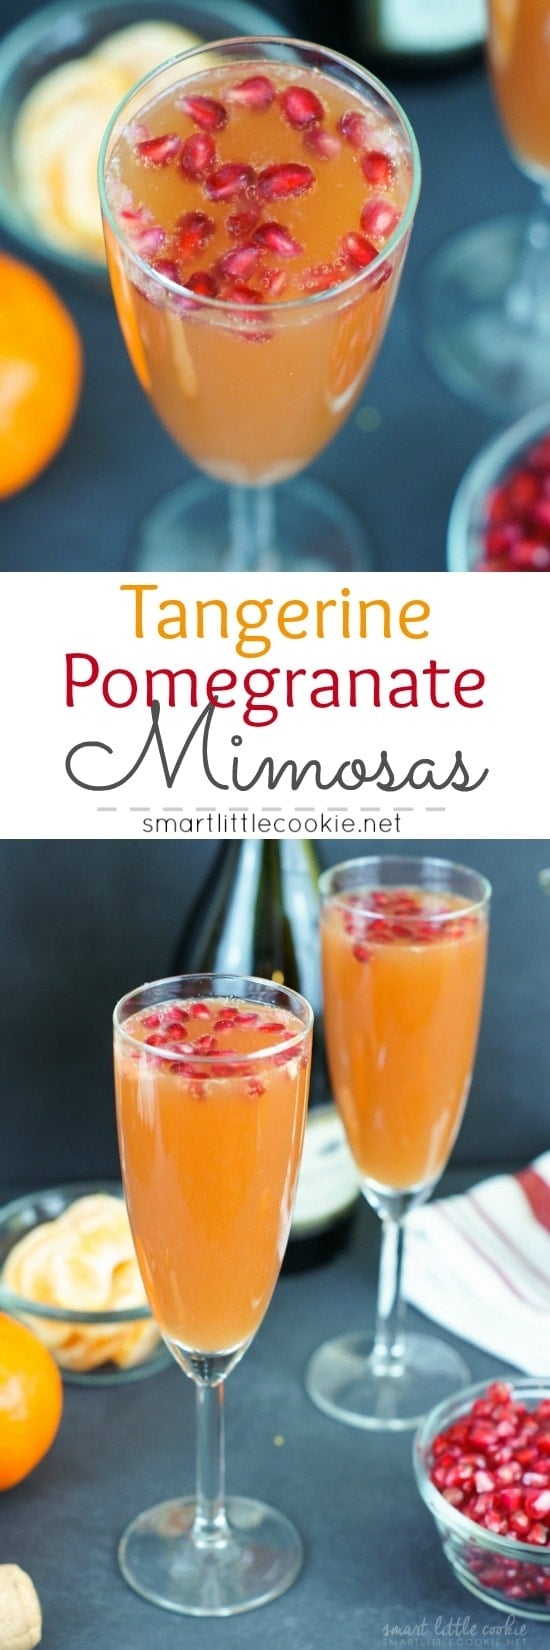 Pinterest graphic. Tangerine pomegranate mimosas with text overlay.